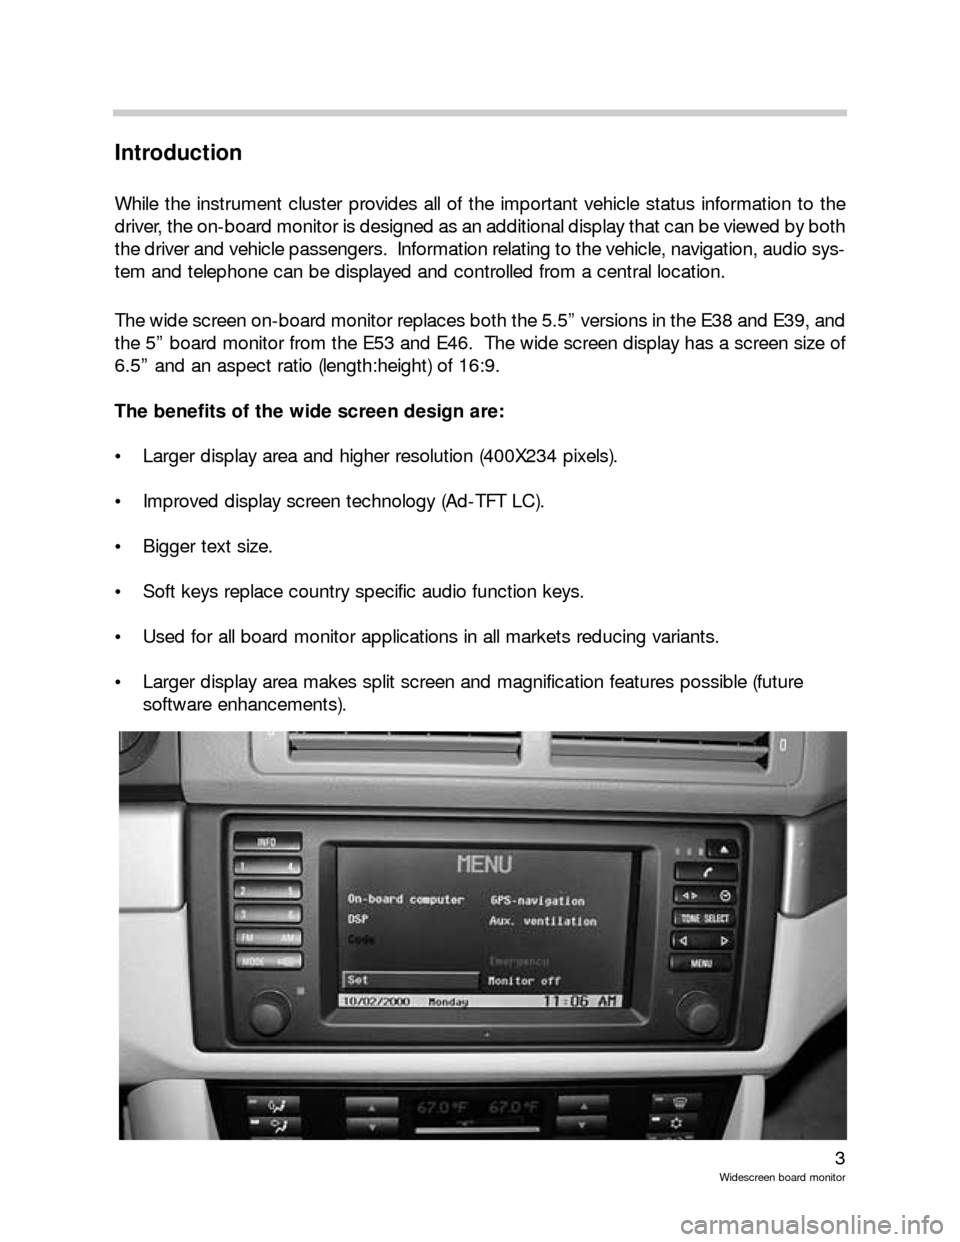 BMW X5 2002 E53 Wide Screen On Board Monitor Workshop Manual 3
Widescreen board monitor
Introduction
While the instrument cluster provides all of the important vehicle status information to the
driver, the on-board monitor is designed as an additional display t